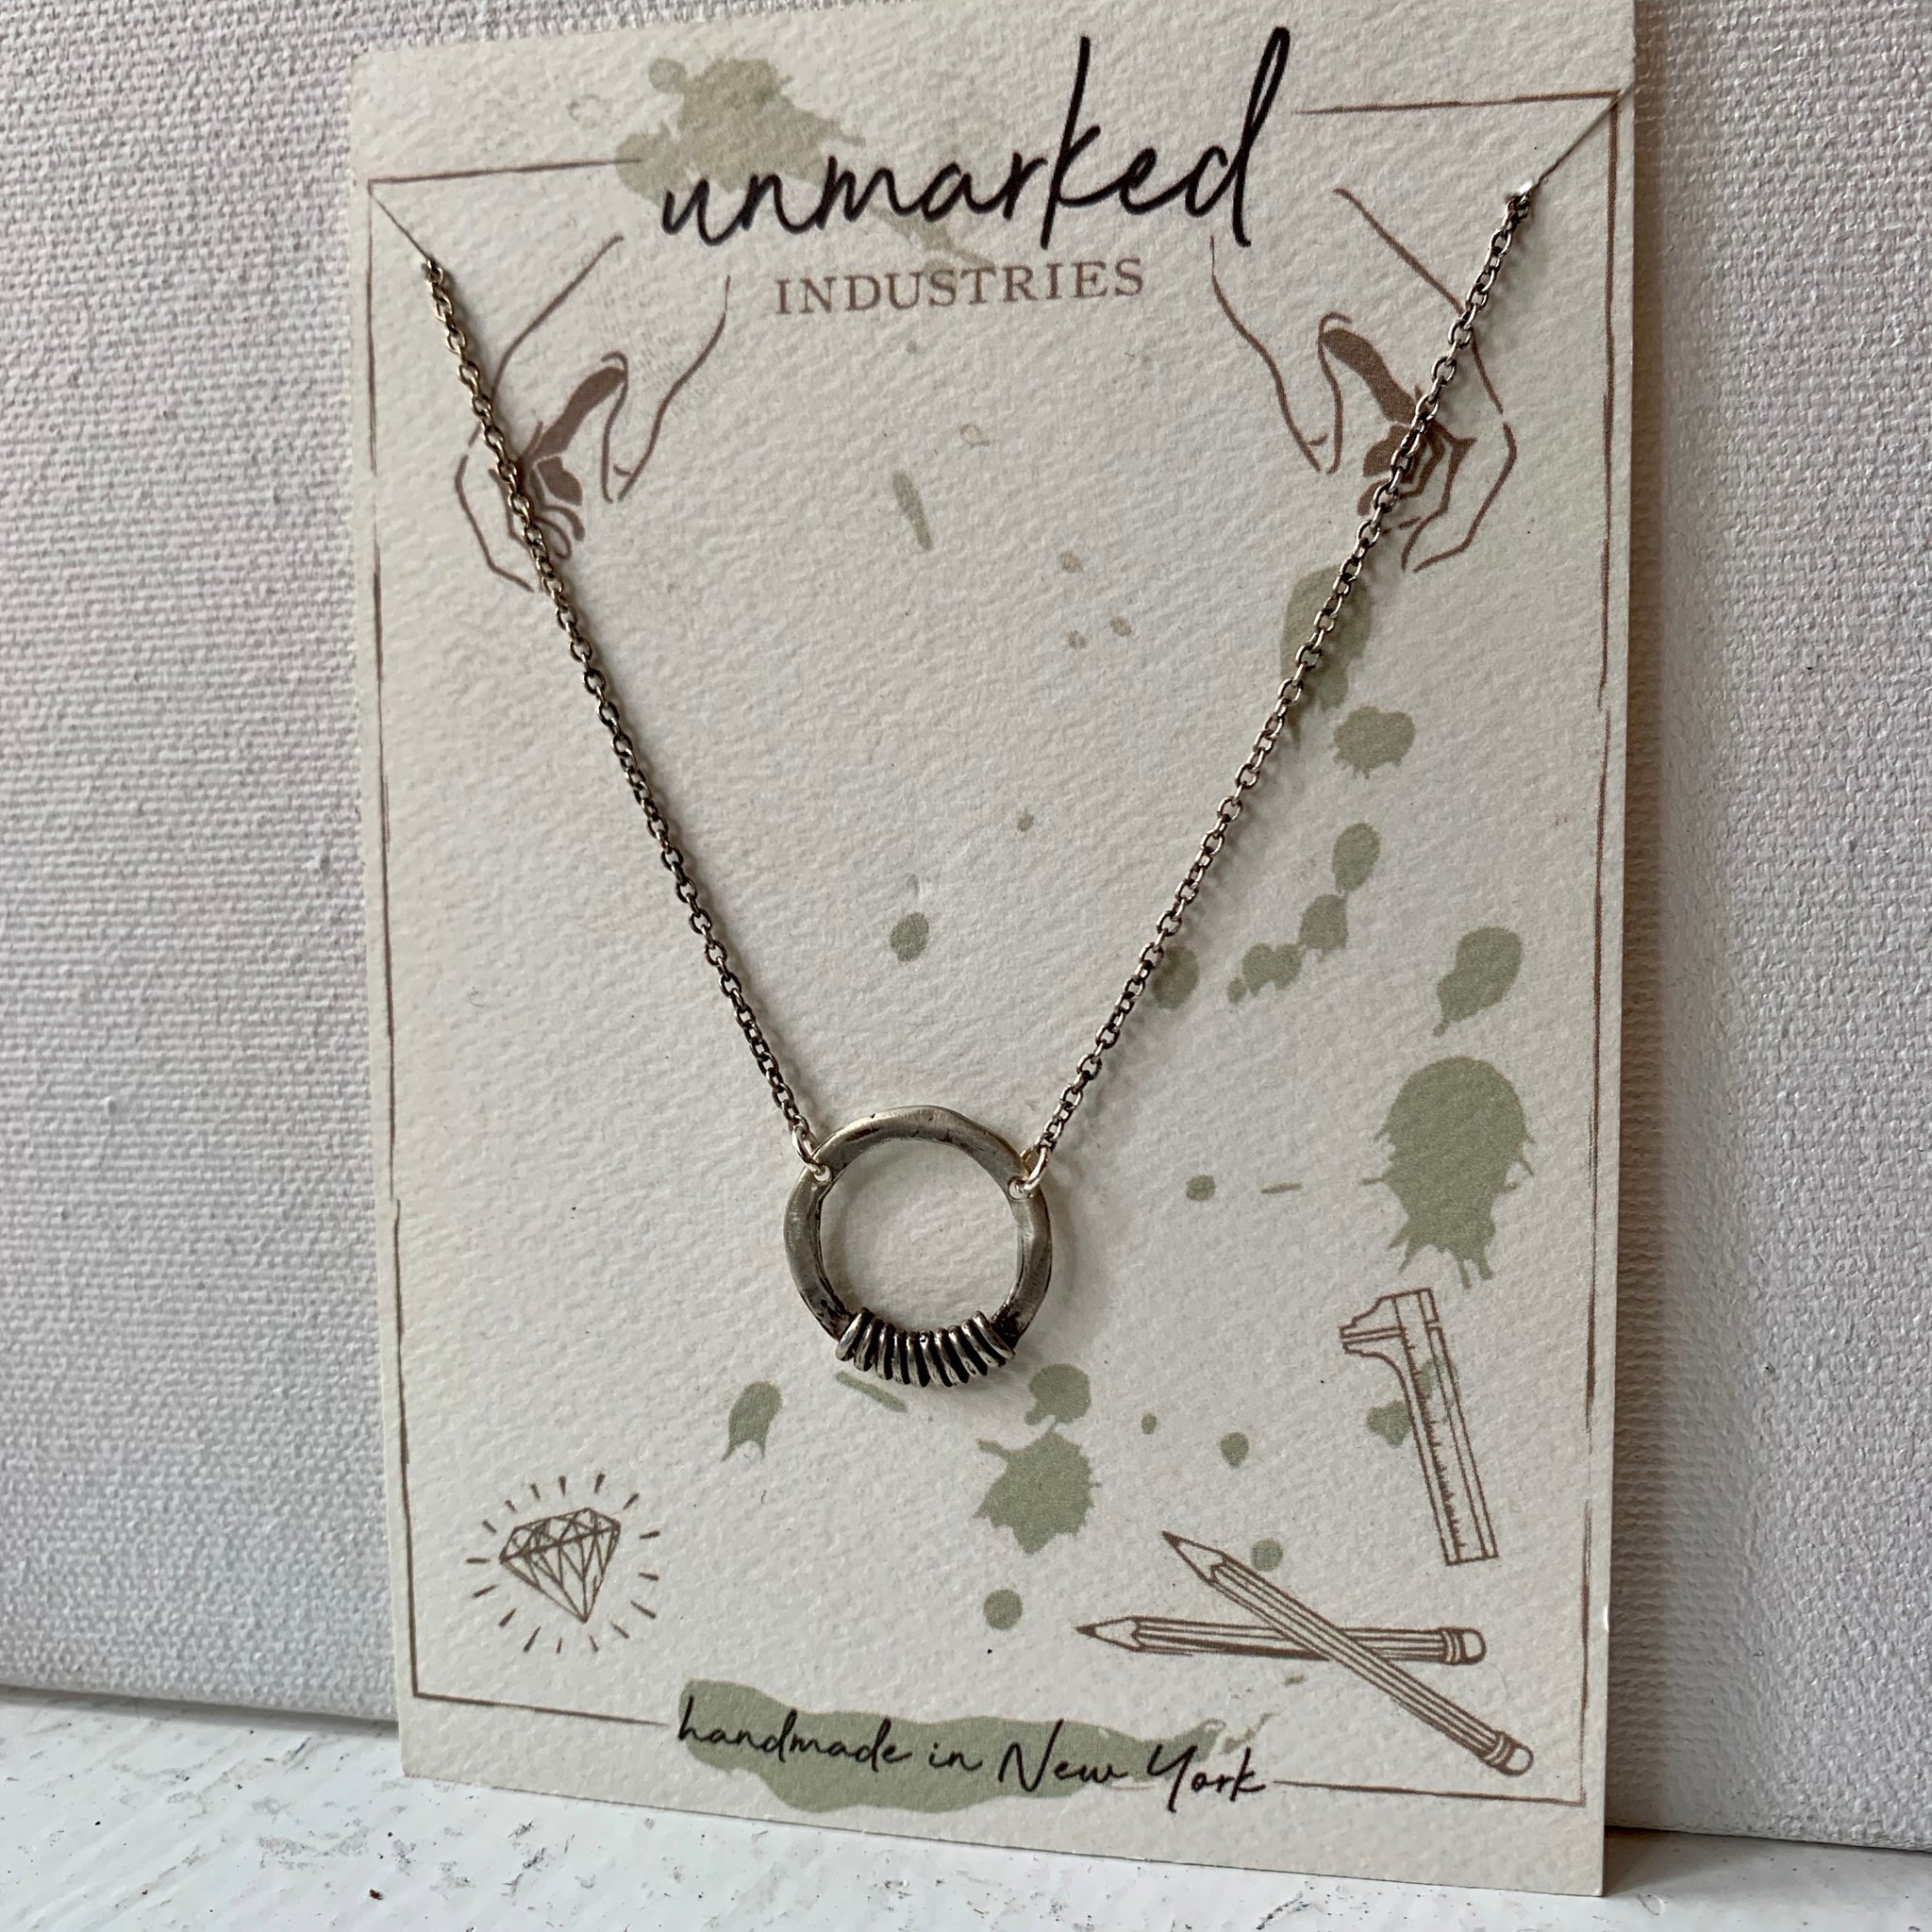 Unmarked Industries necklaces